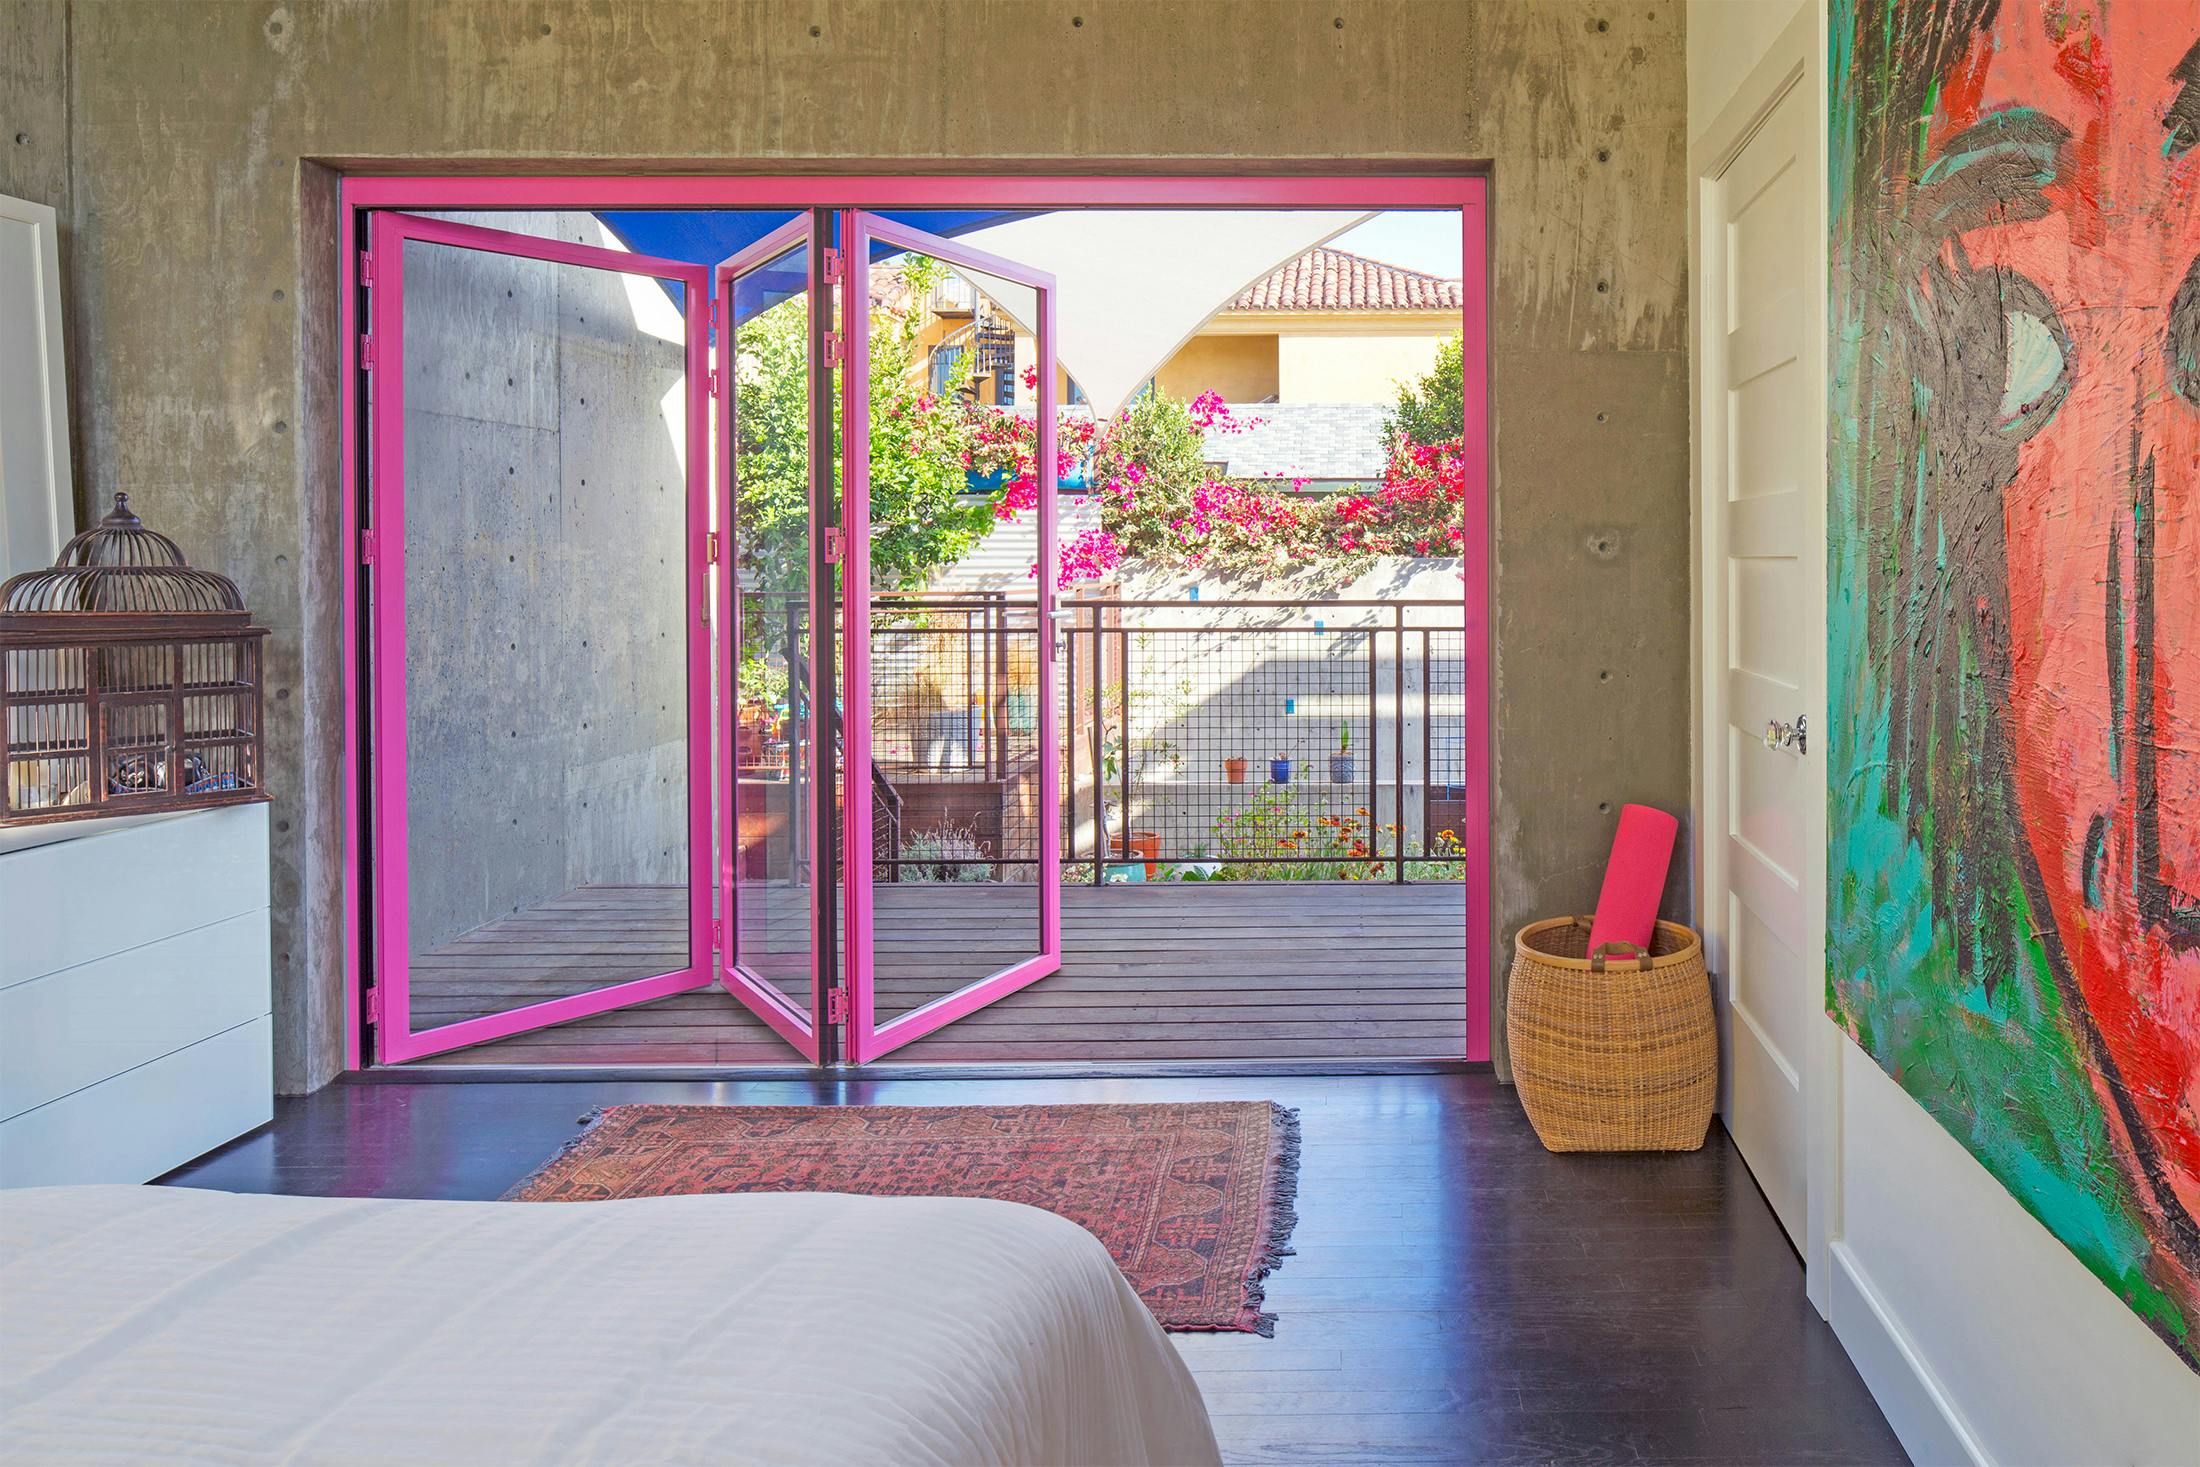 NanaWall glass wall systems in Barbie pink